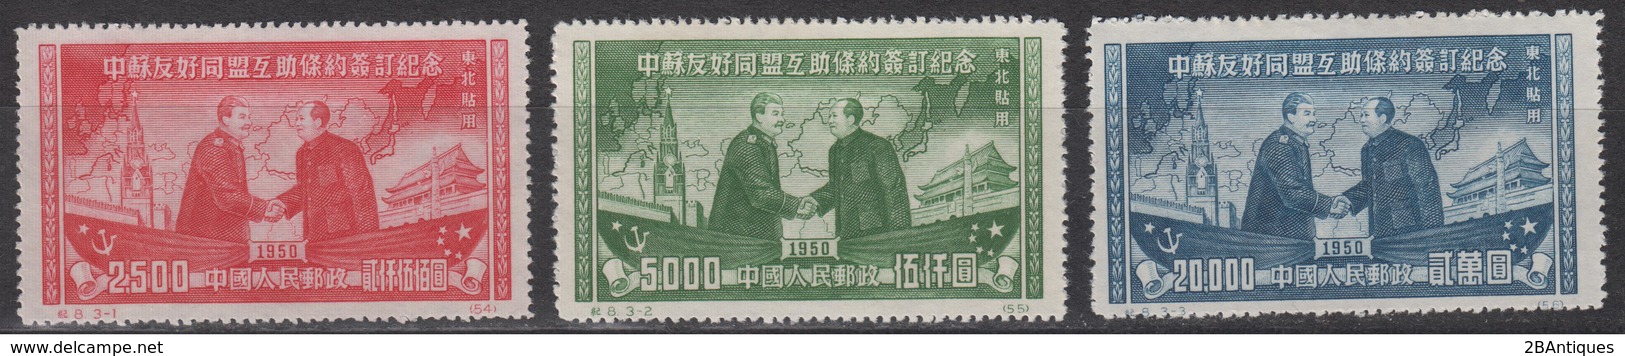 NORTH-EAST CHINA 1950 - Sino - Soviet Treaty Of Friendship MNH Complete Set - Cina Del Nord-Est 1946-48